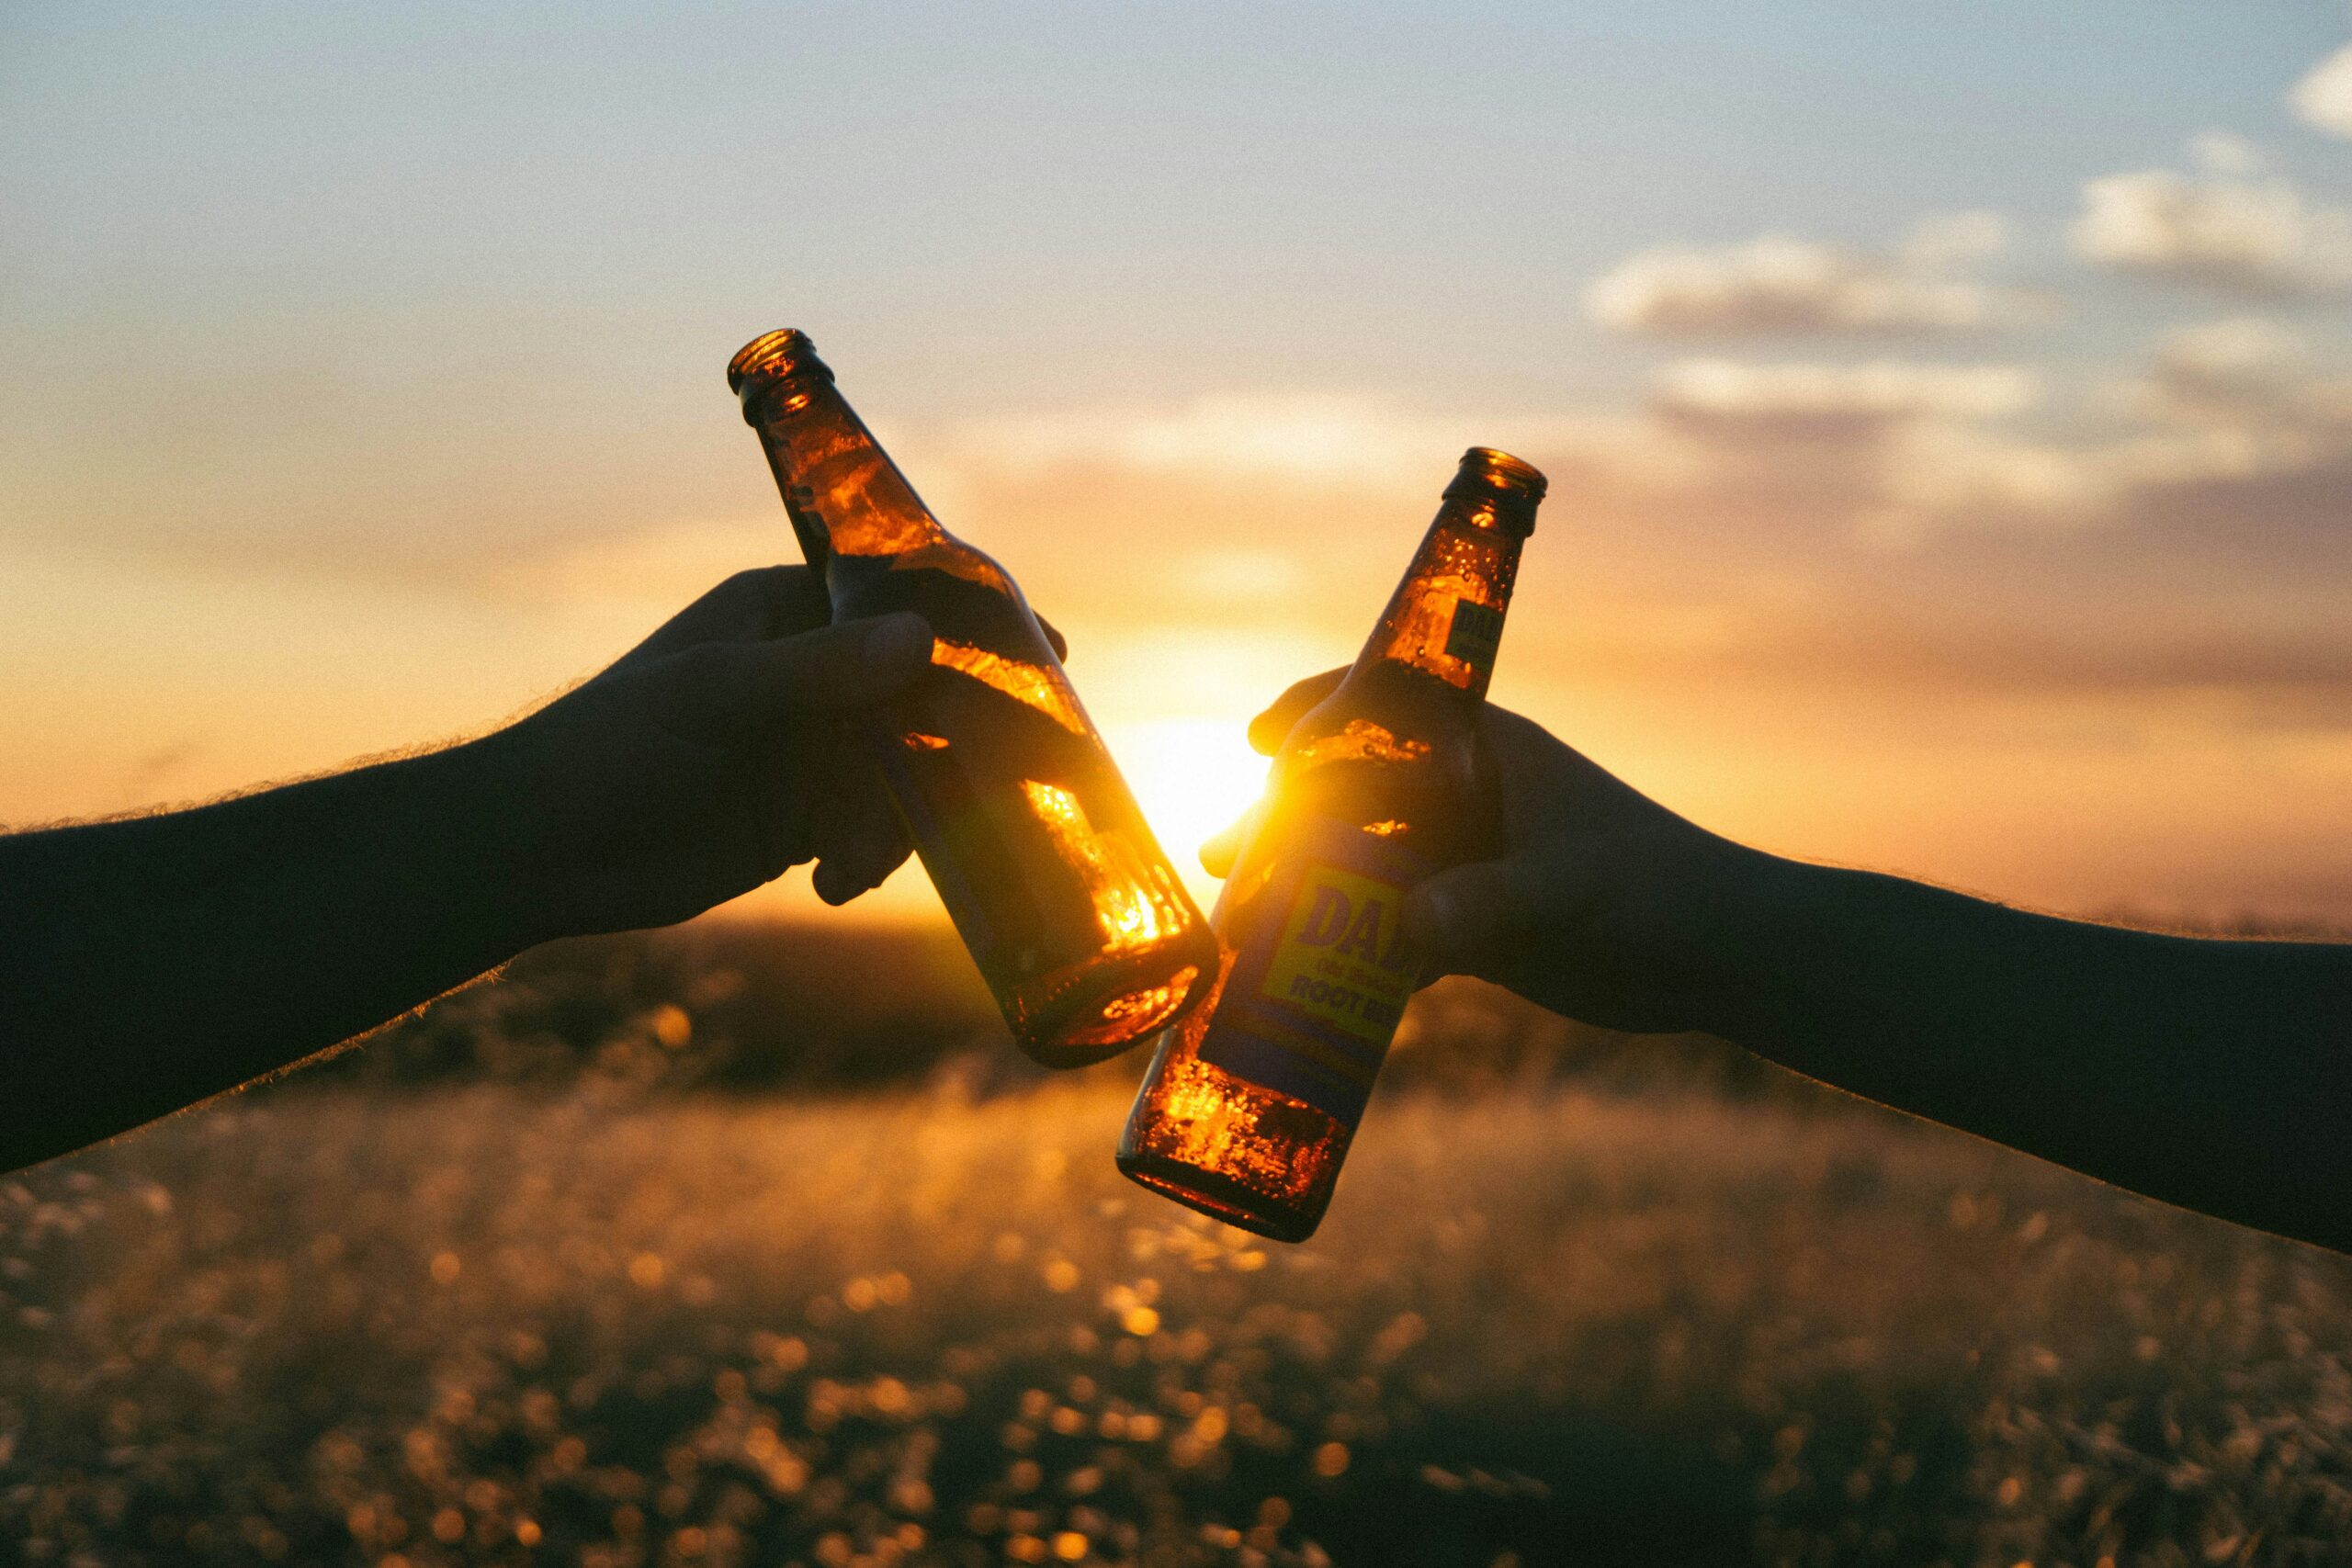 James Donaldson on Mental Health – ‘Alcohol can exacerbate underlying mental health issues’: Alcohol use linked to suicide and self-harm, studies find